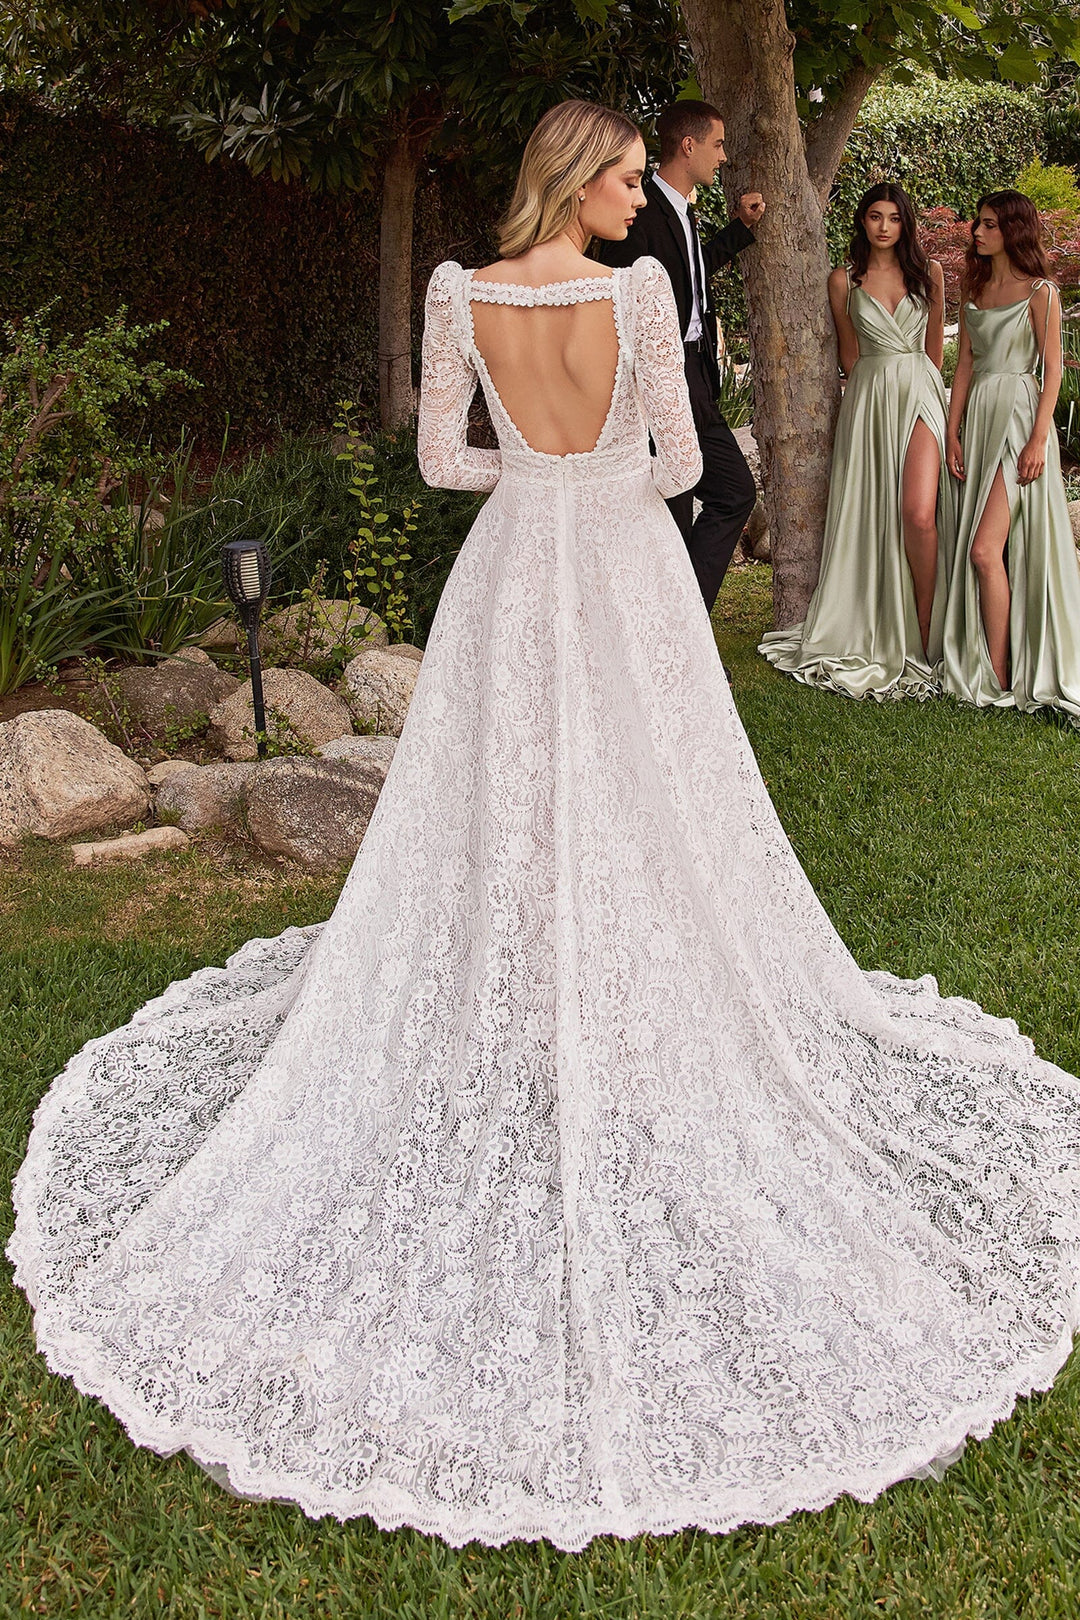 Lace Bridal Gown with Removable Jacket by Ladivine CD862W